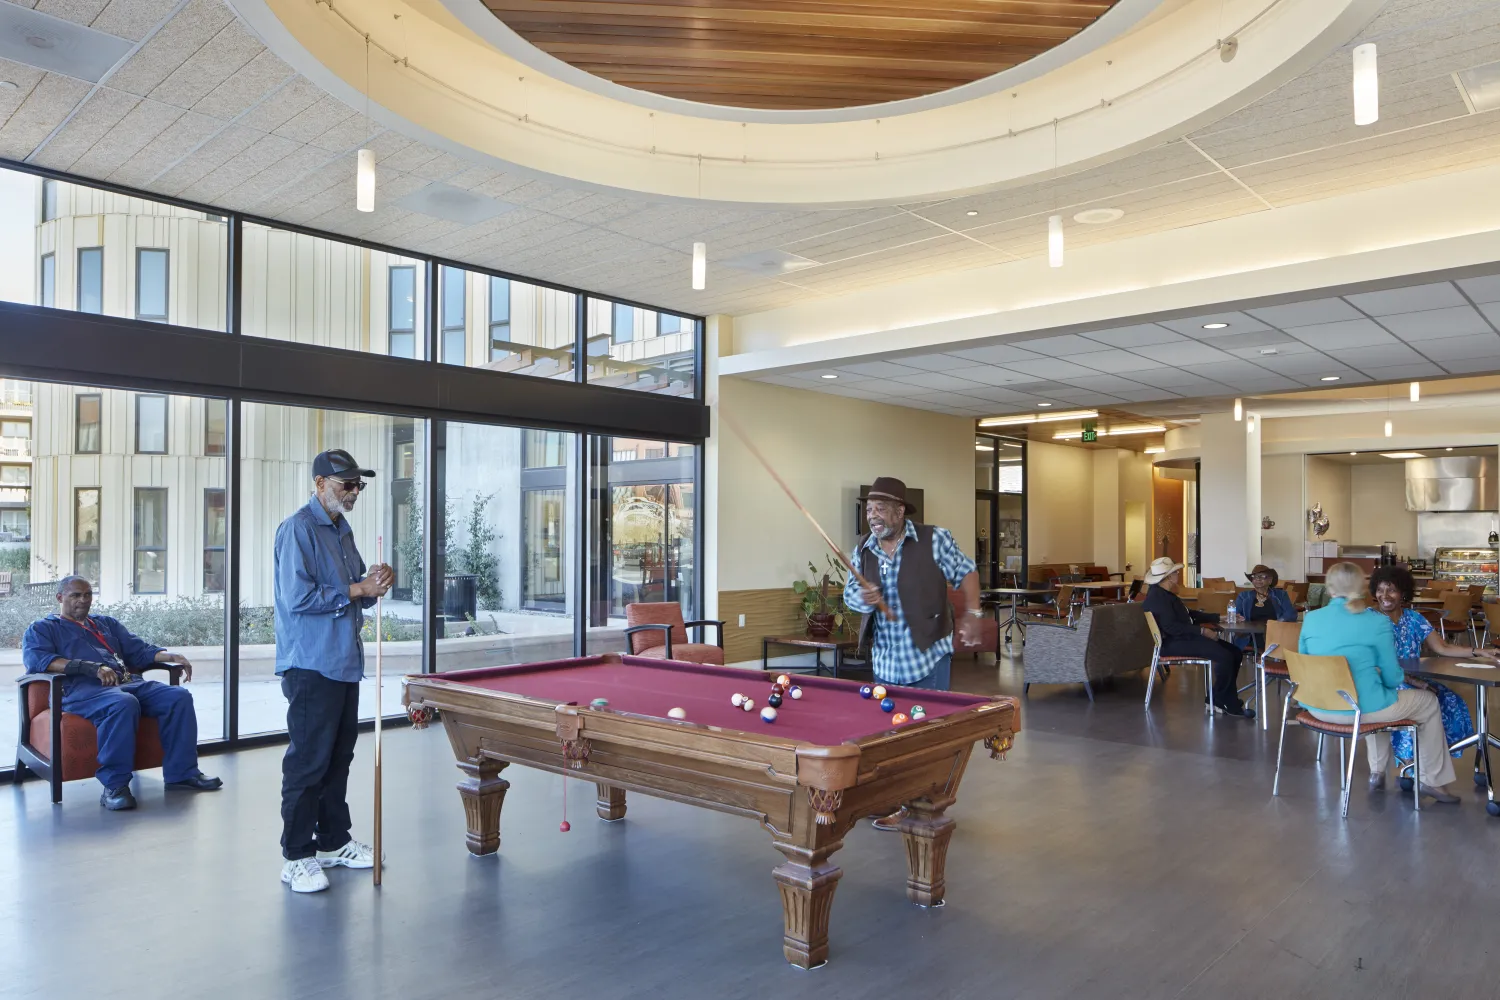 Residents playing pool at the Senior Center inside Dr. George Davis Senior Building in San Francisco.